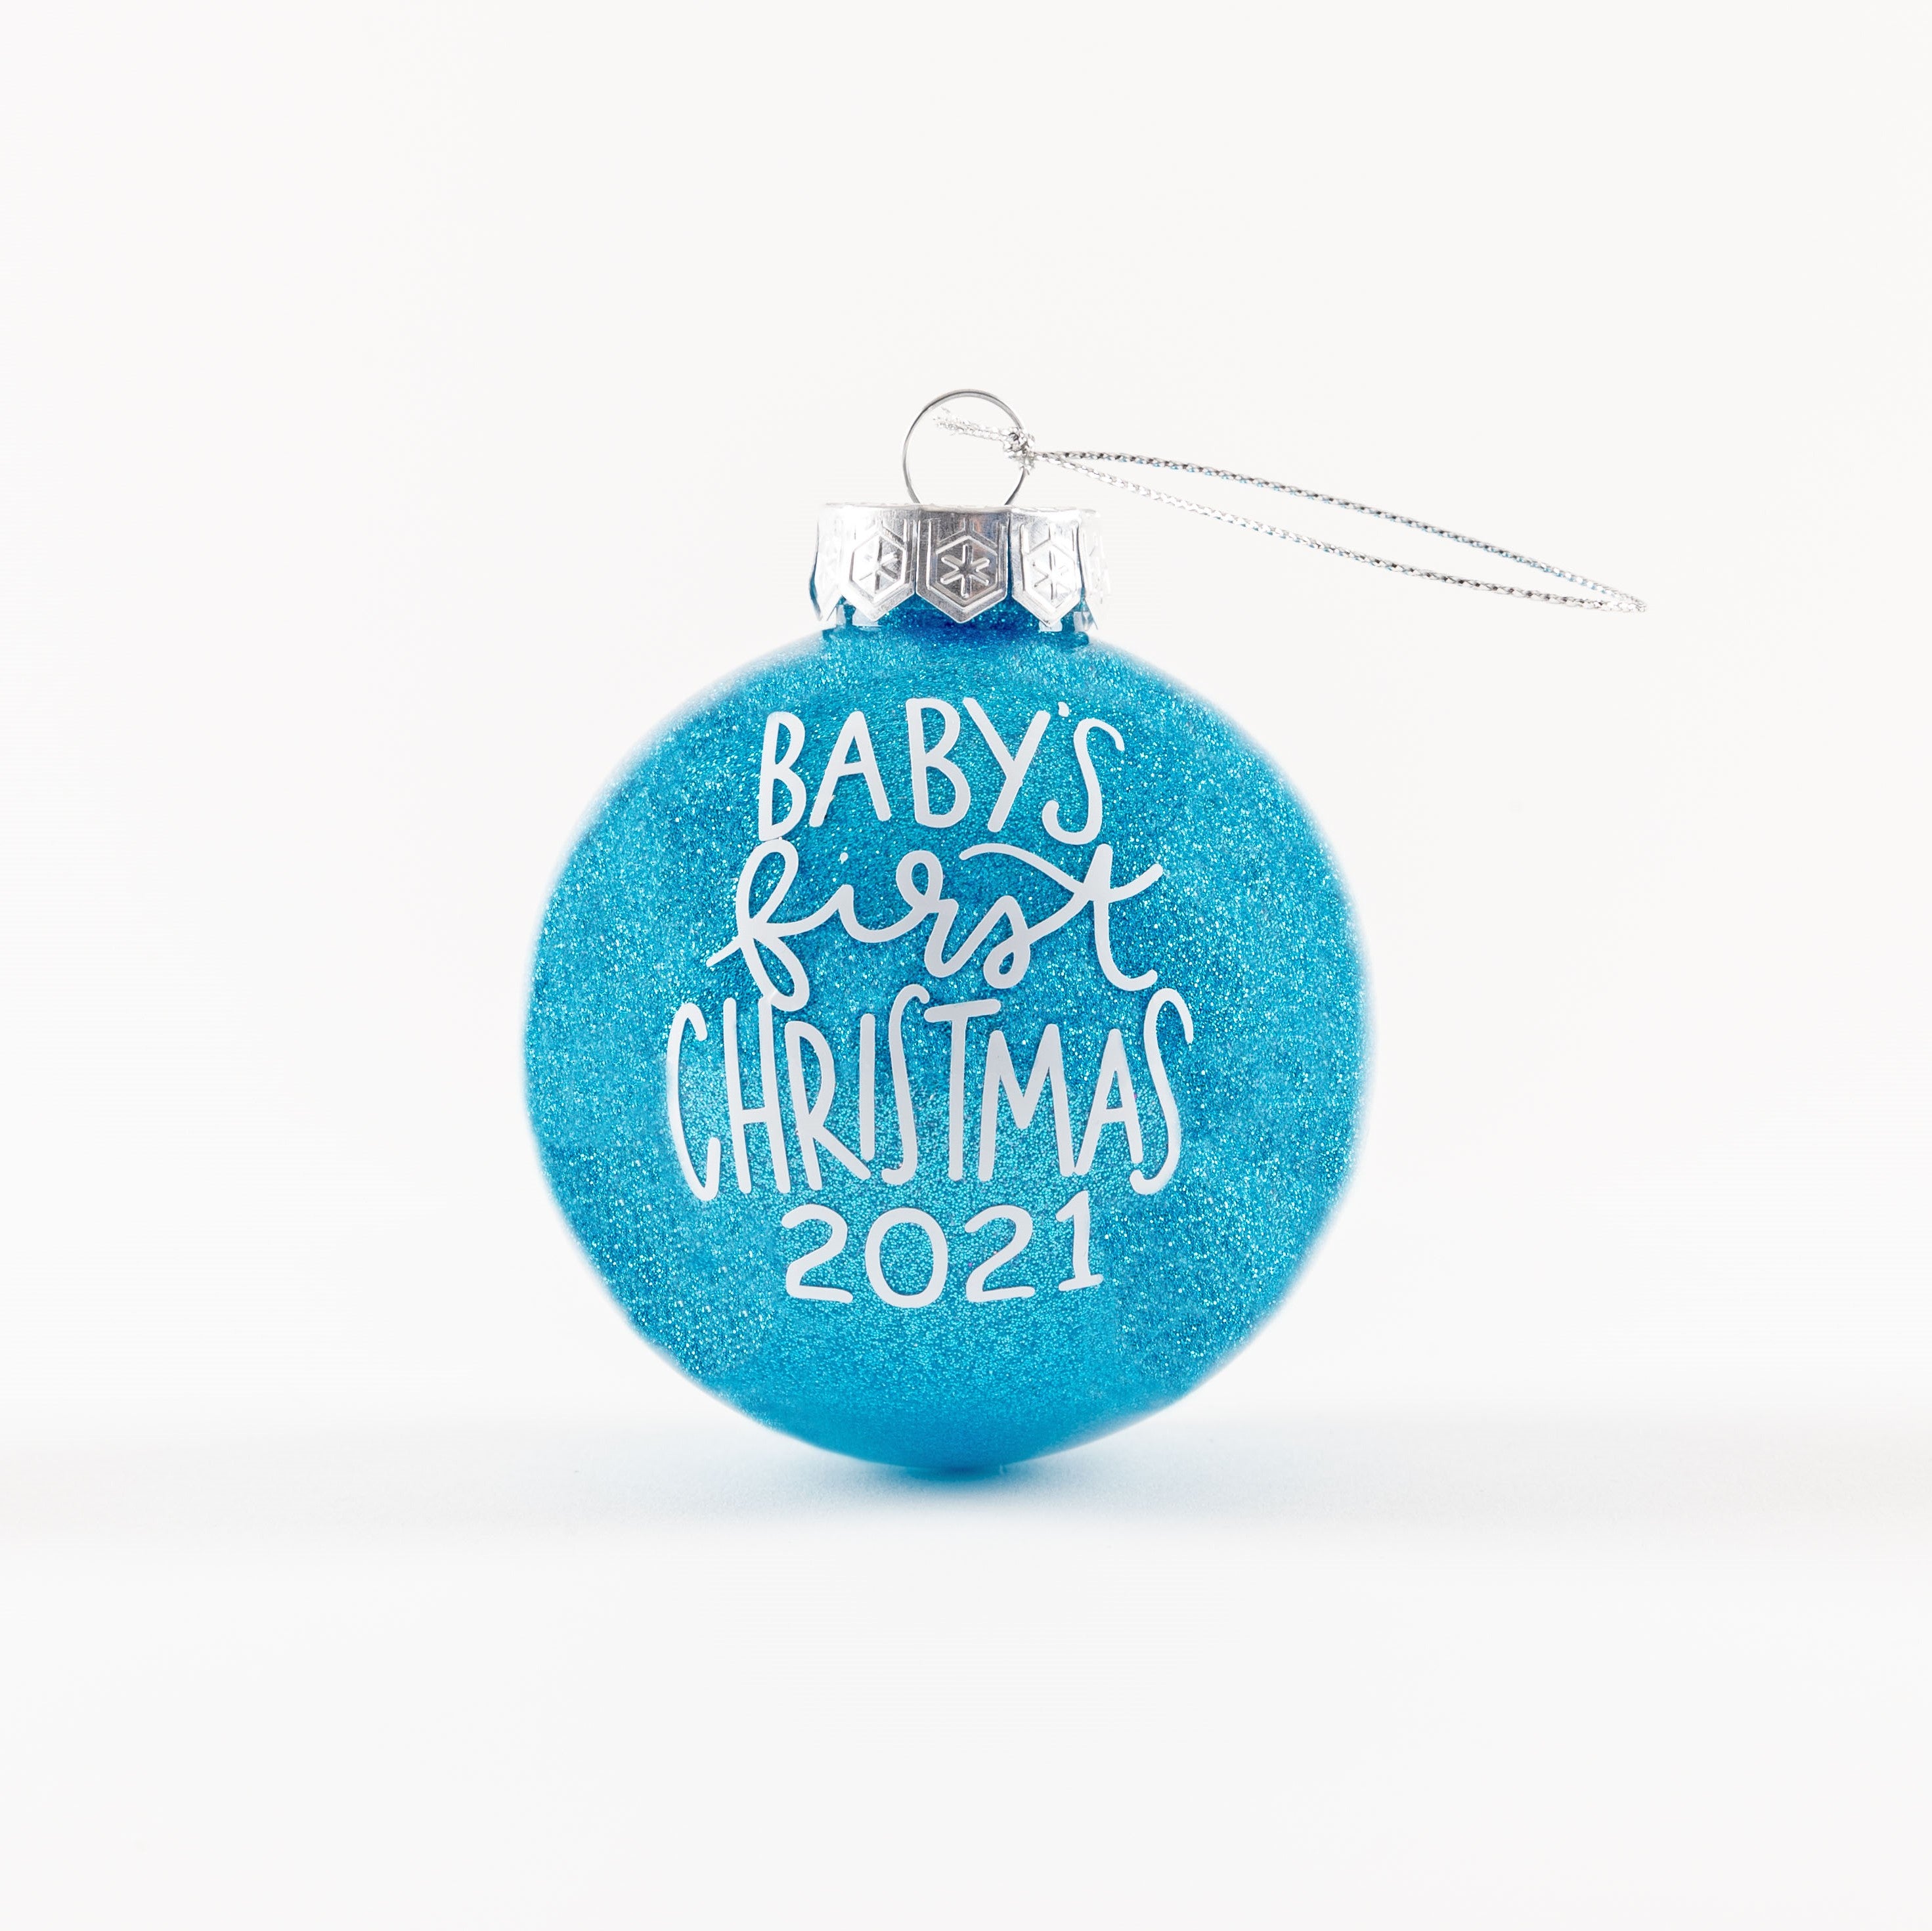 Sparkly blue ornament with Baby's First Christmas 2021 written in white font.